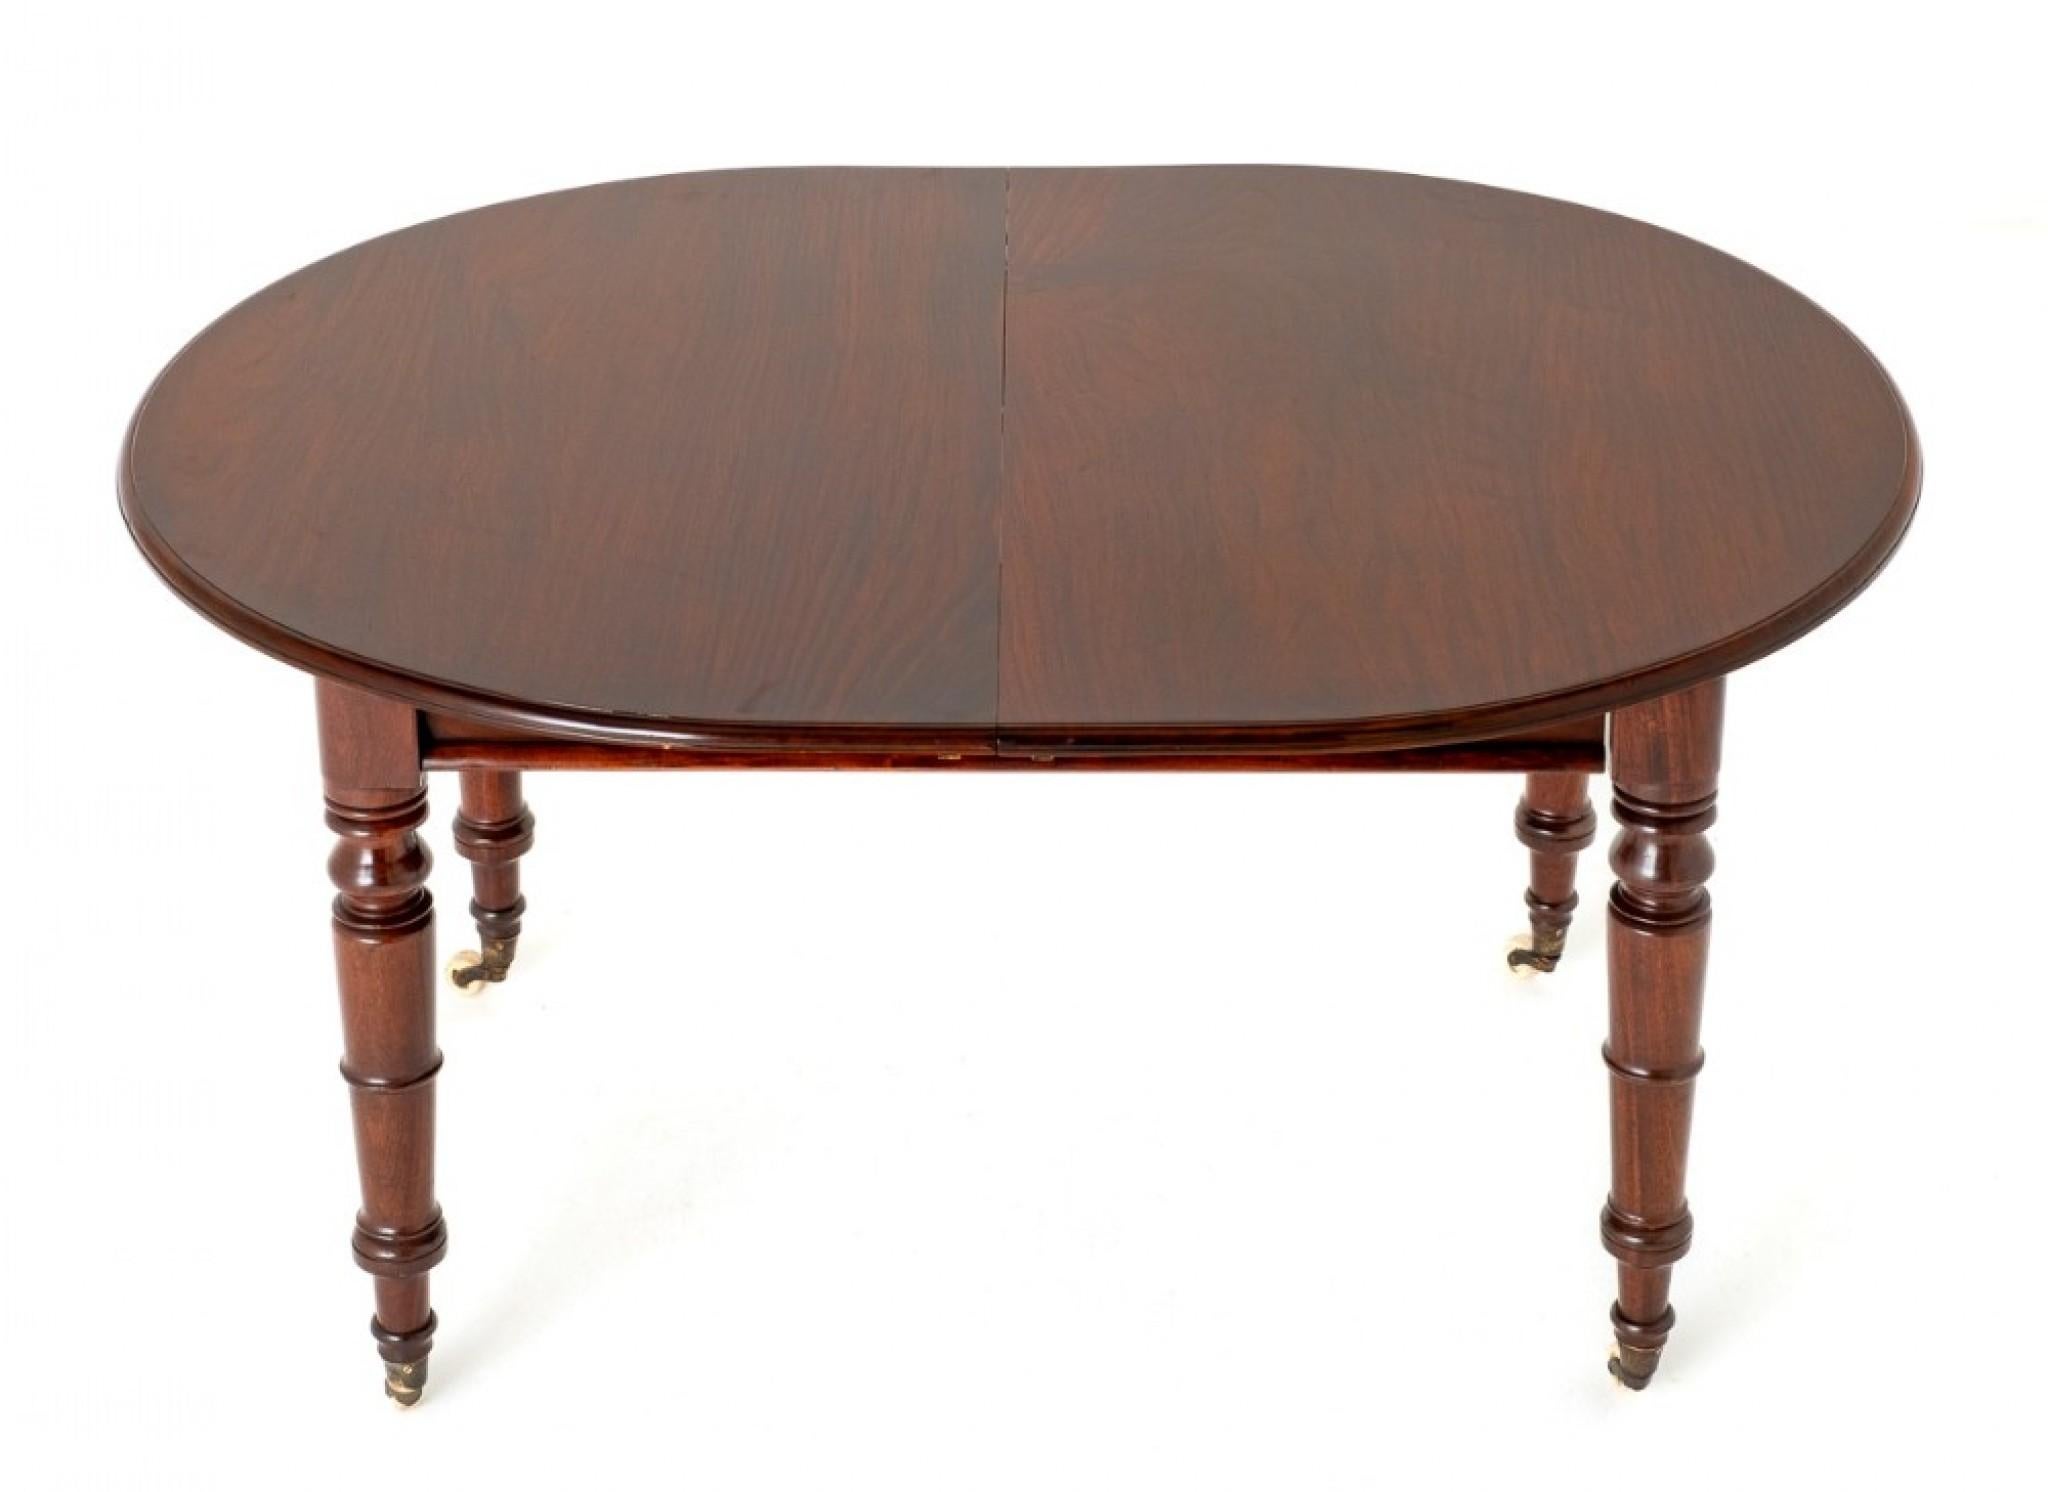 Mahogany Victorian Extending Dining Table 1860 For Sale